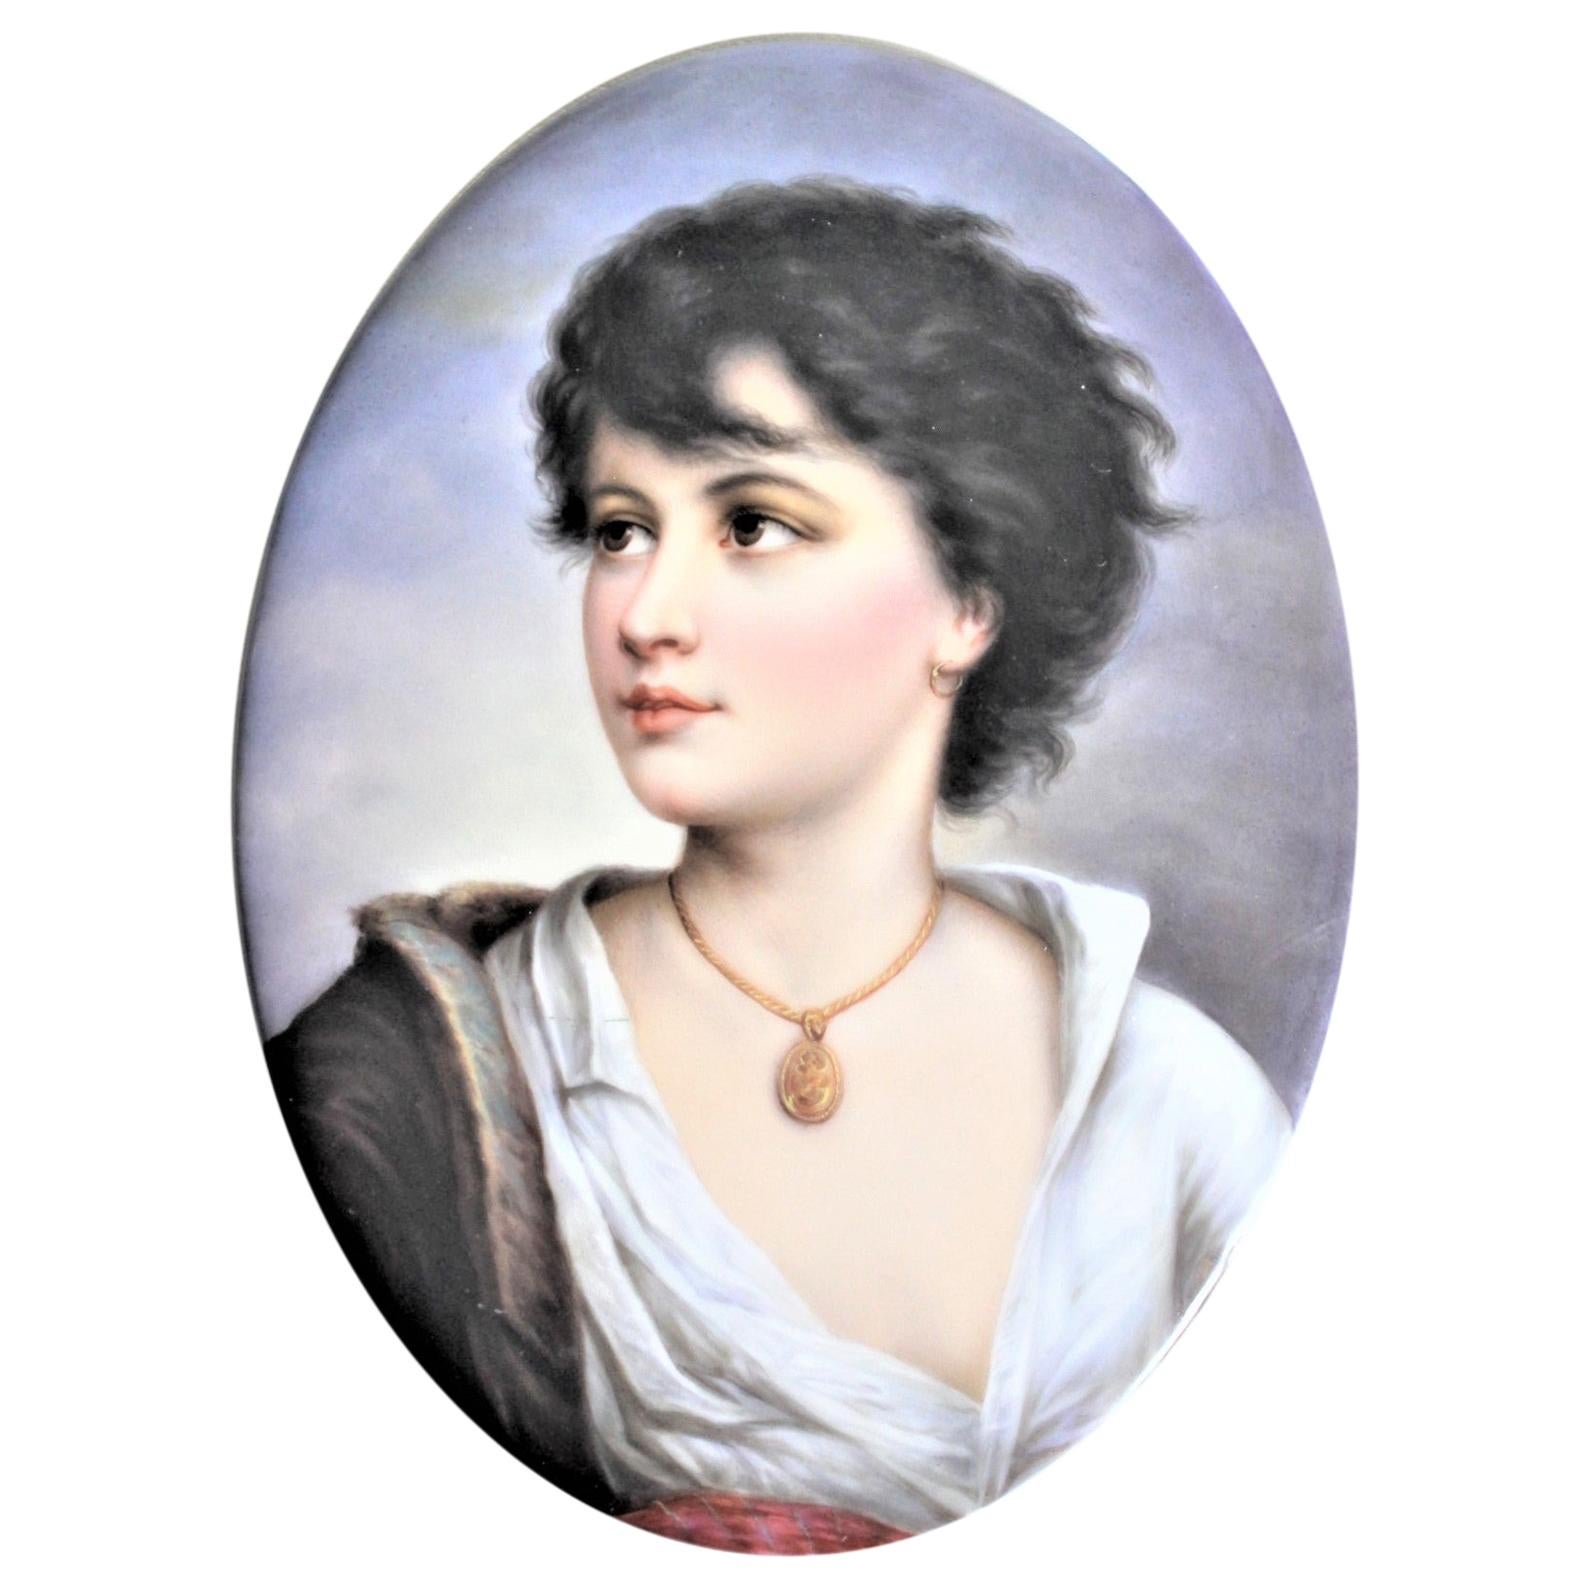 Large Antique Oval Hand Painted Portrait of a Woman on a Porcelain Wall Plaque